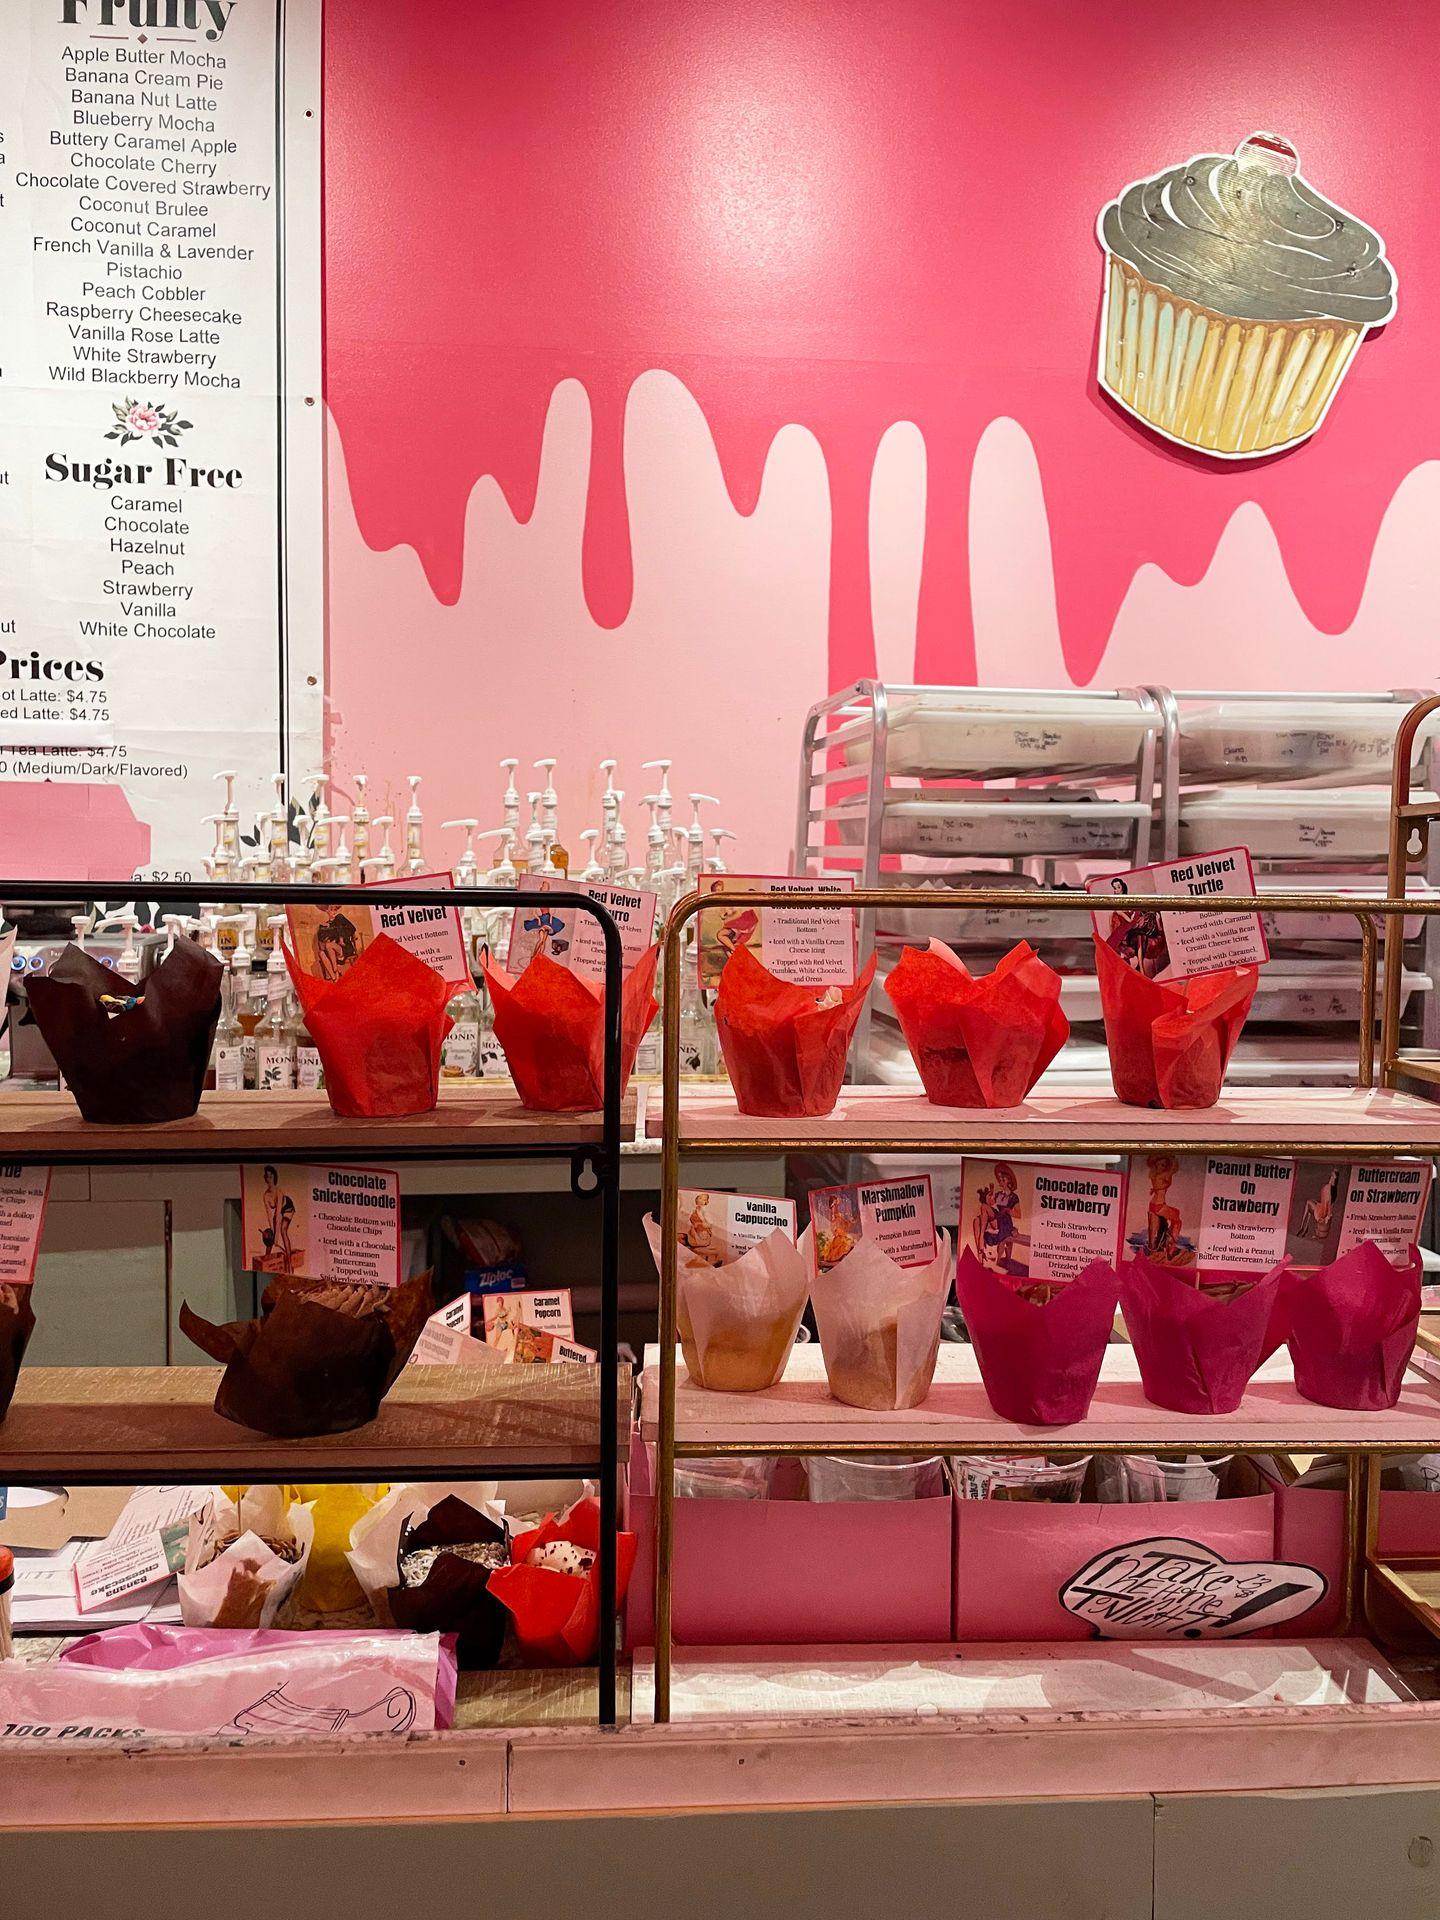 Some shelves sit on a counter with several cupcakes on them. The cupcakes are wrapped in red, white and purple paper.